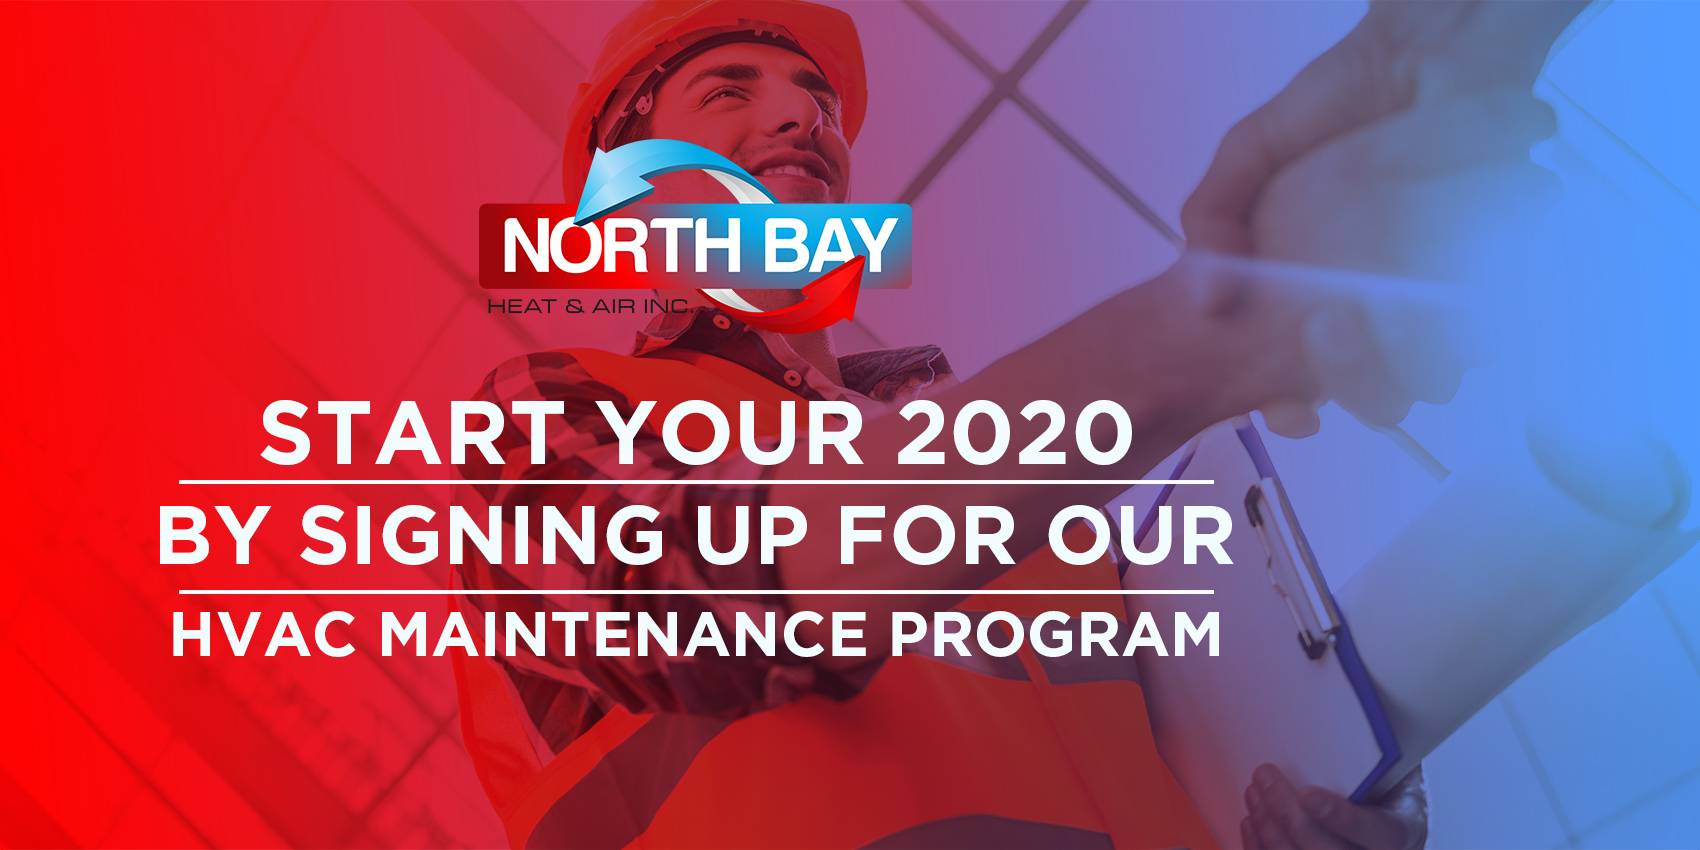 Start Your 2020 by Signing Up for Our HVAC Maintenance Program